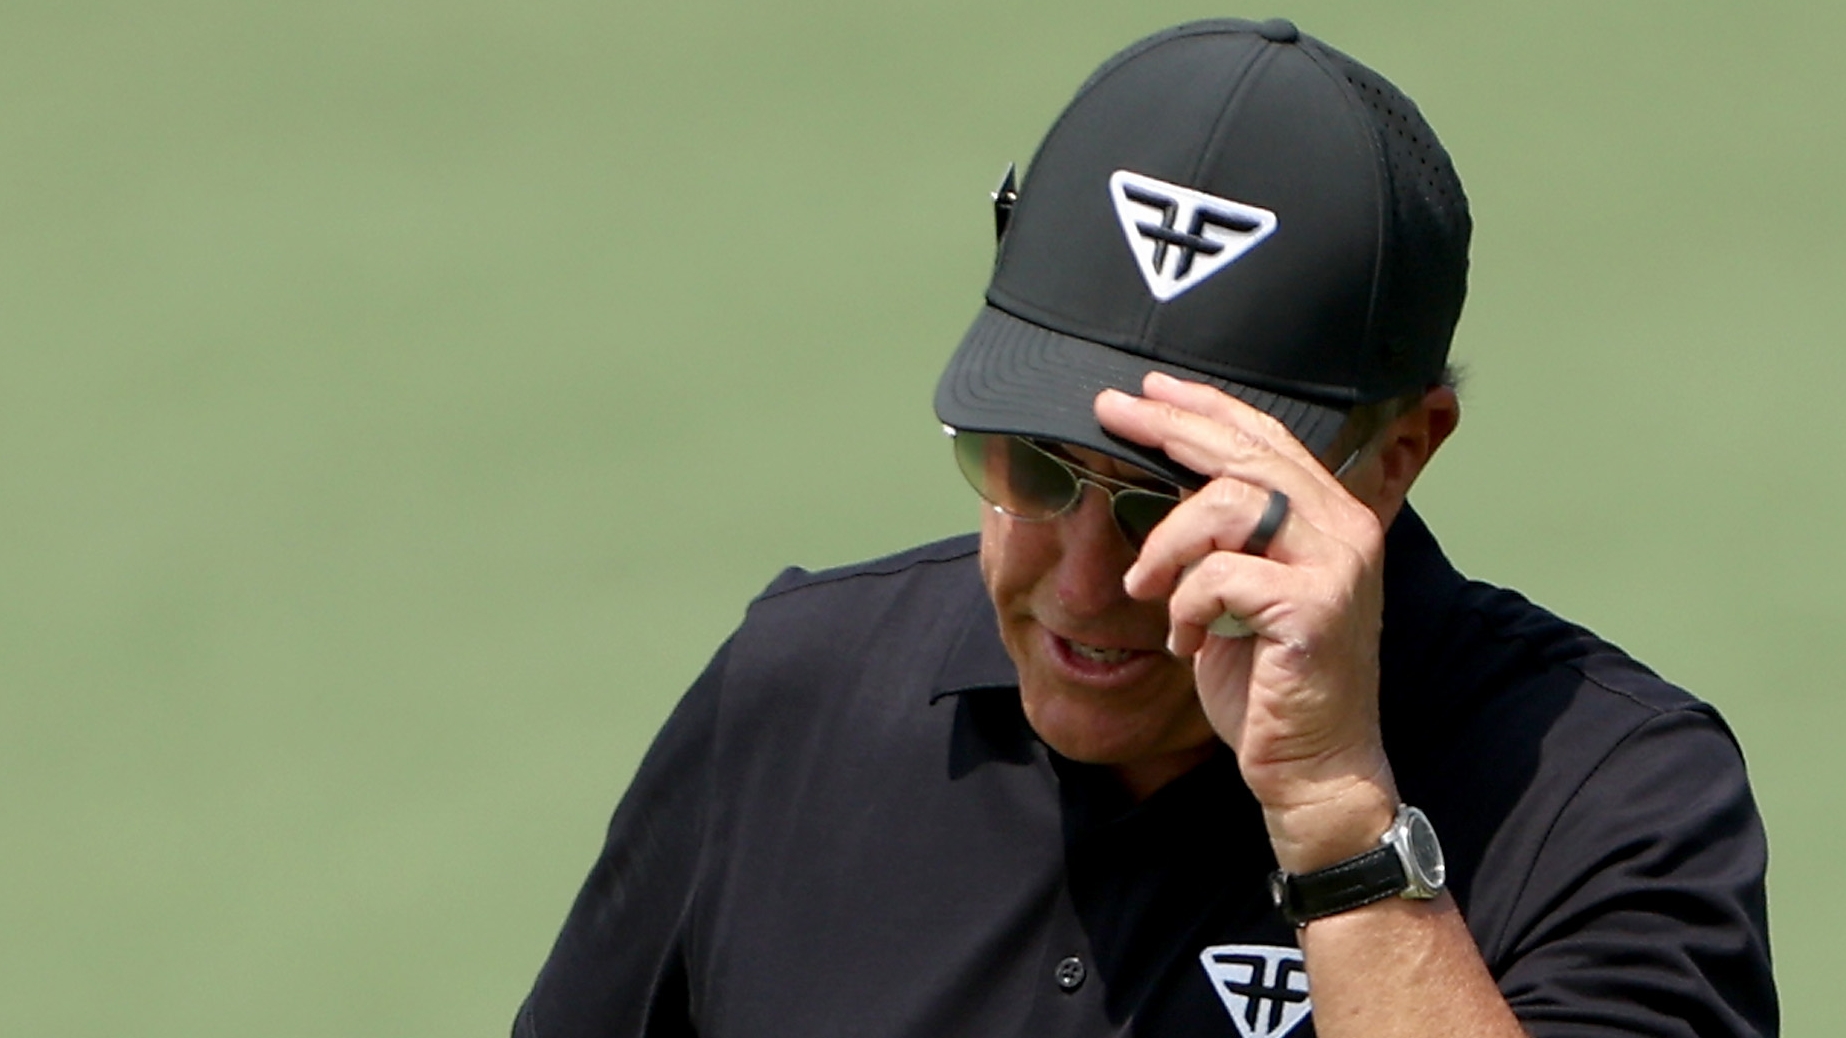 Phil Mickelson gets back under par with a birdie on 12